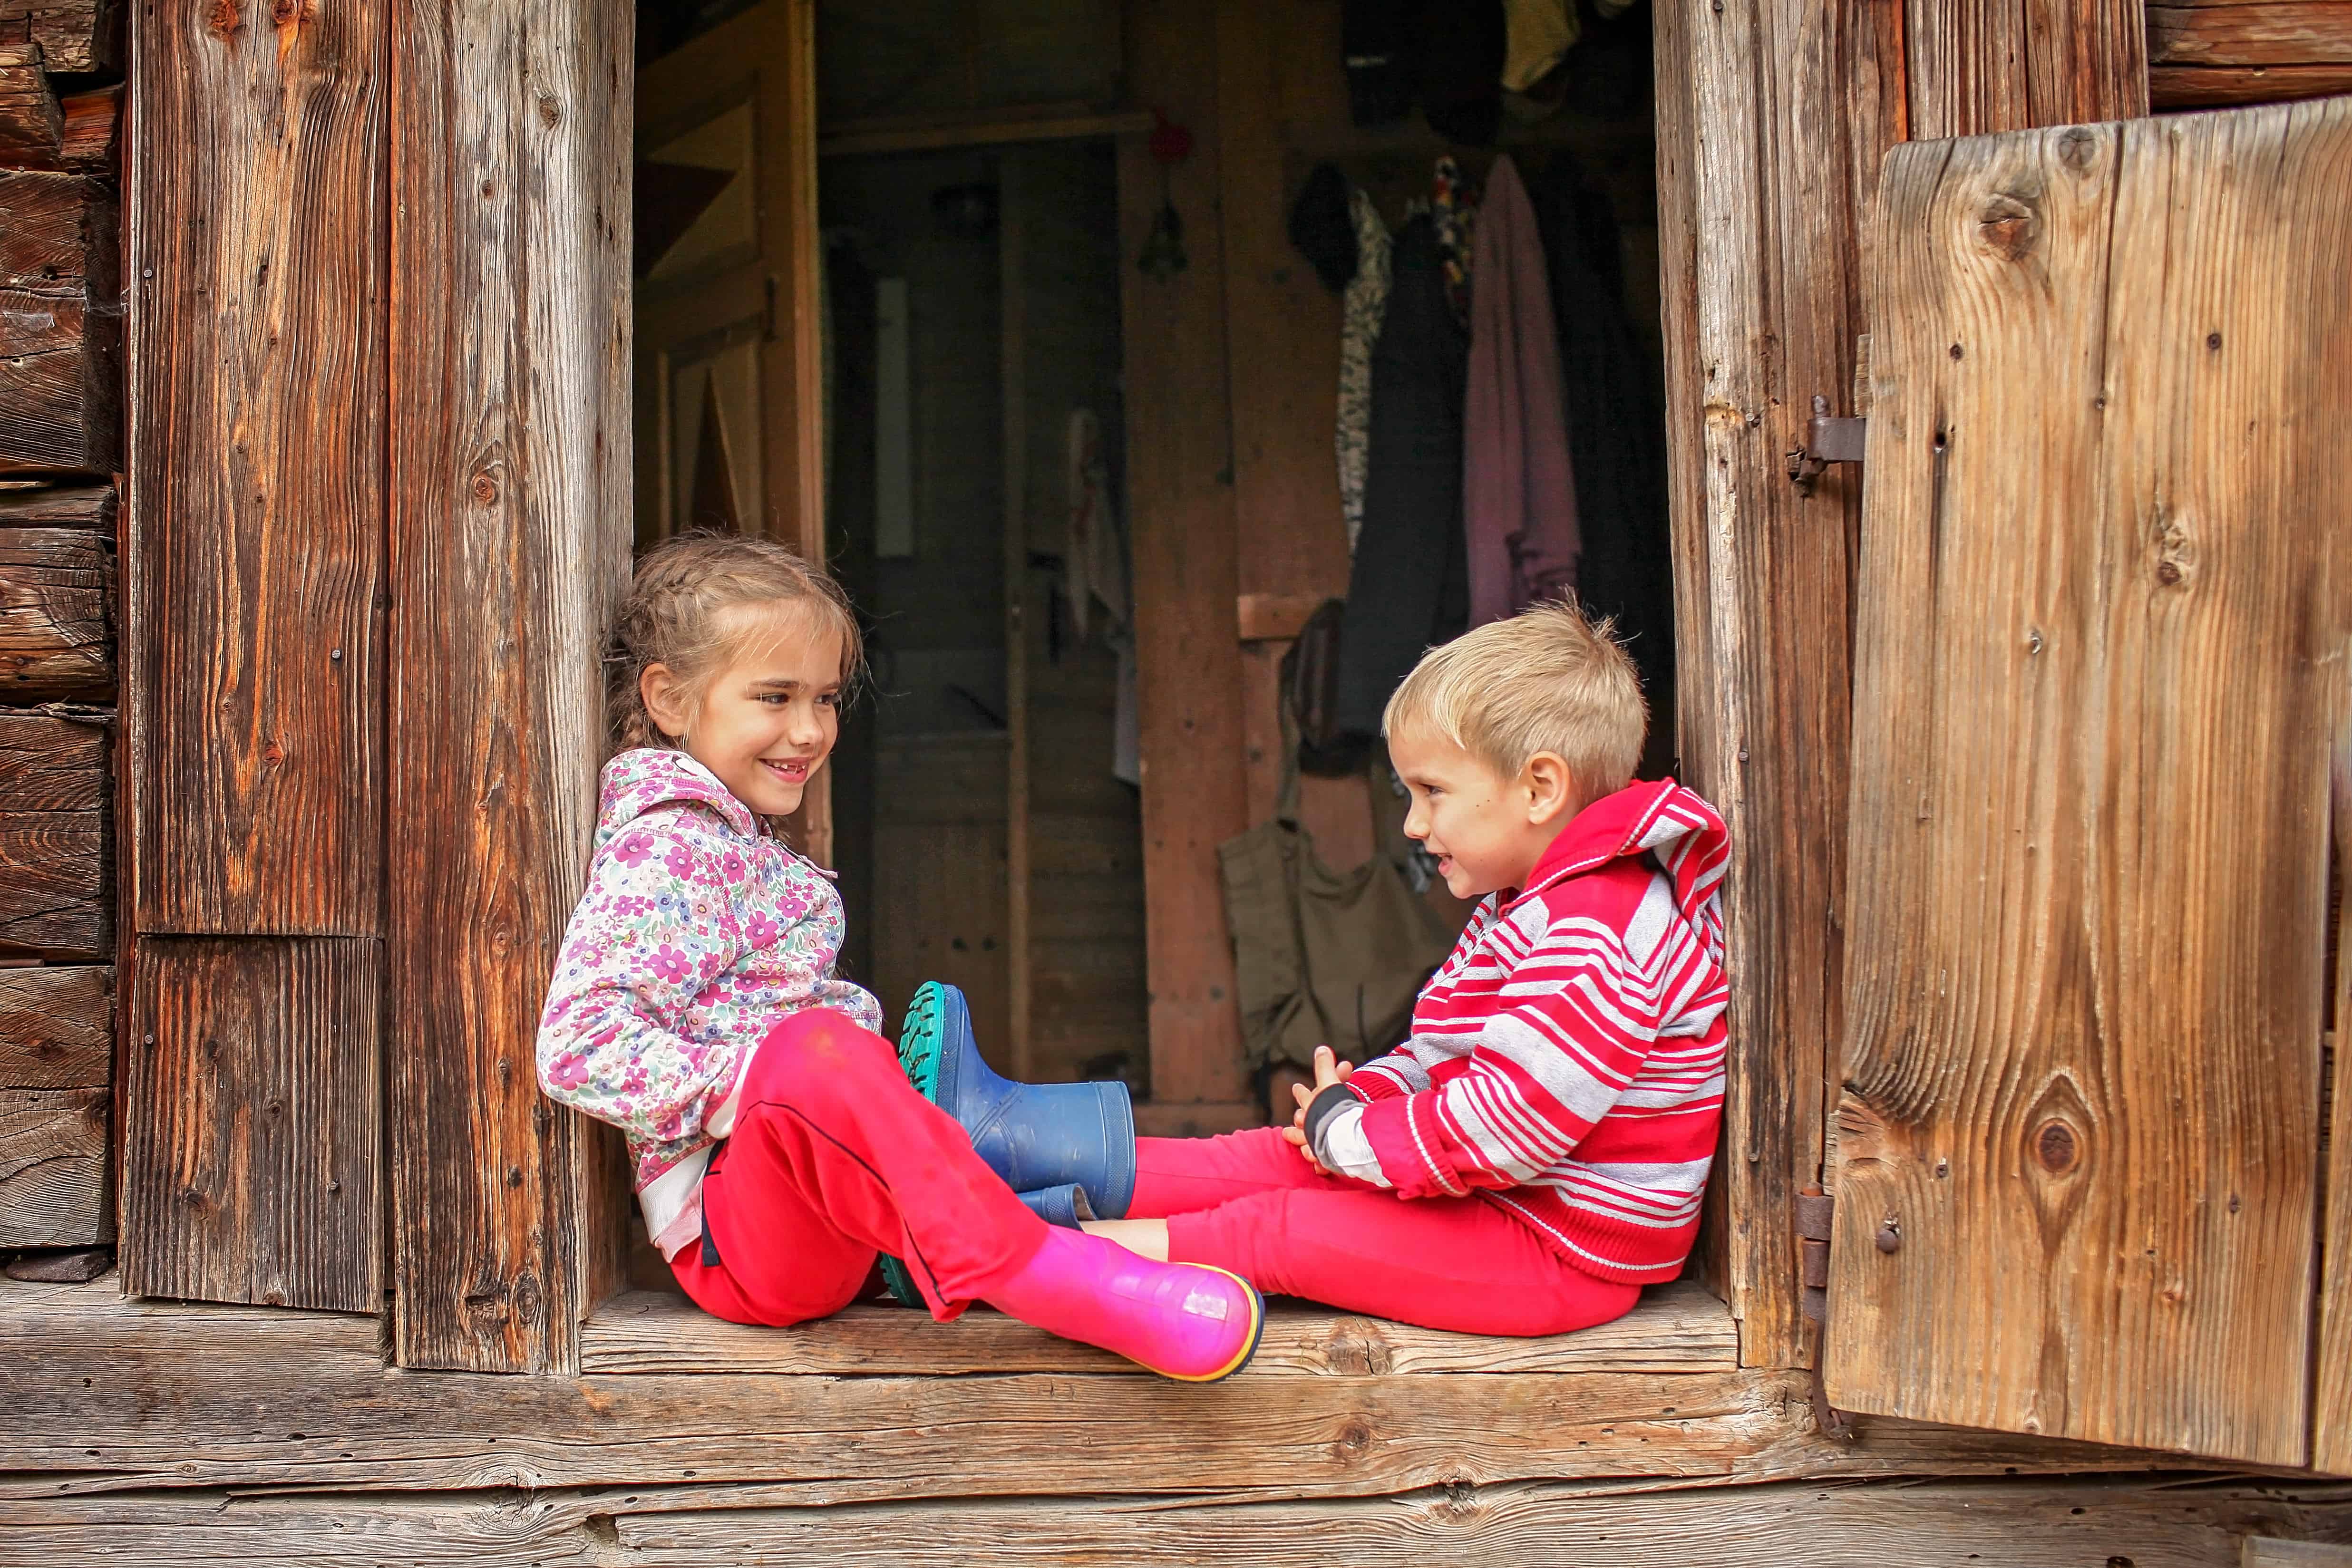 Boy and girls sitting in entrance of a wooden house during summer staycation